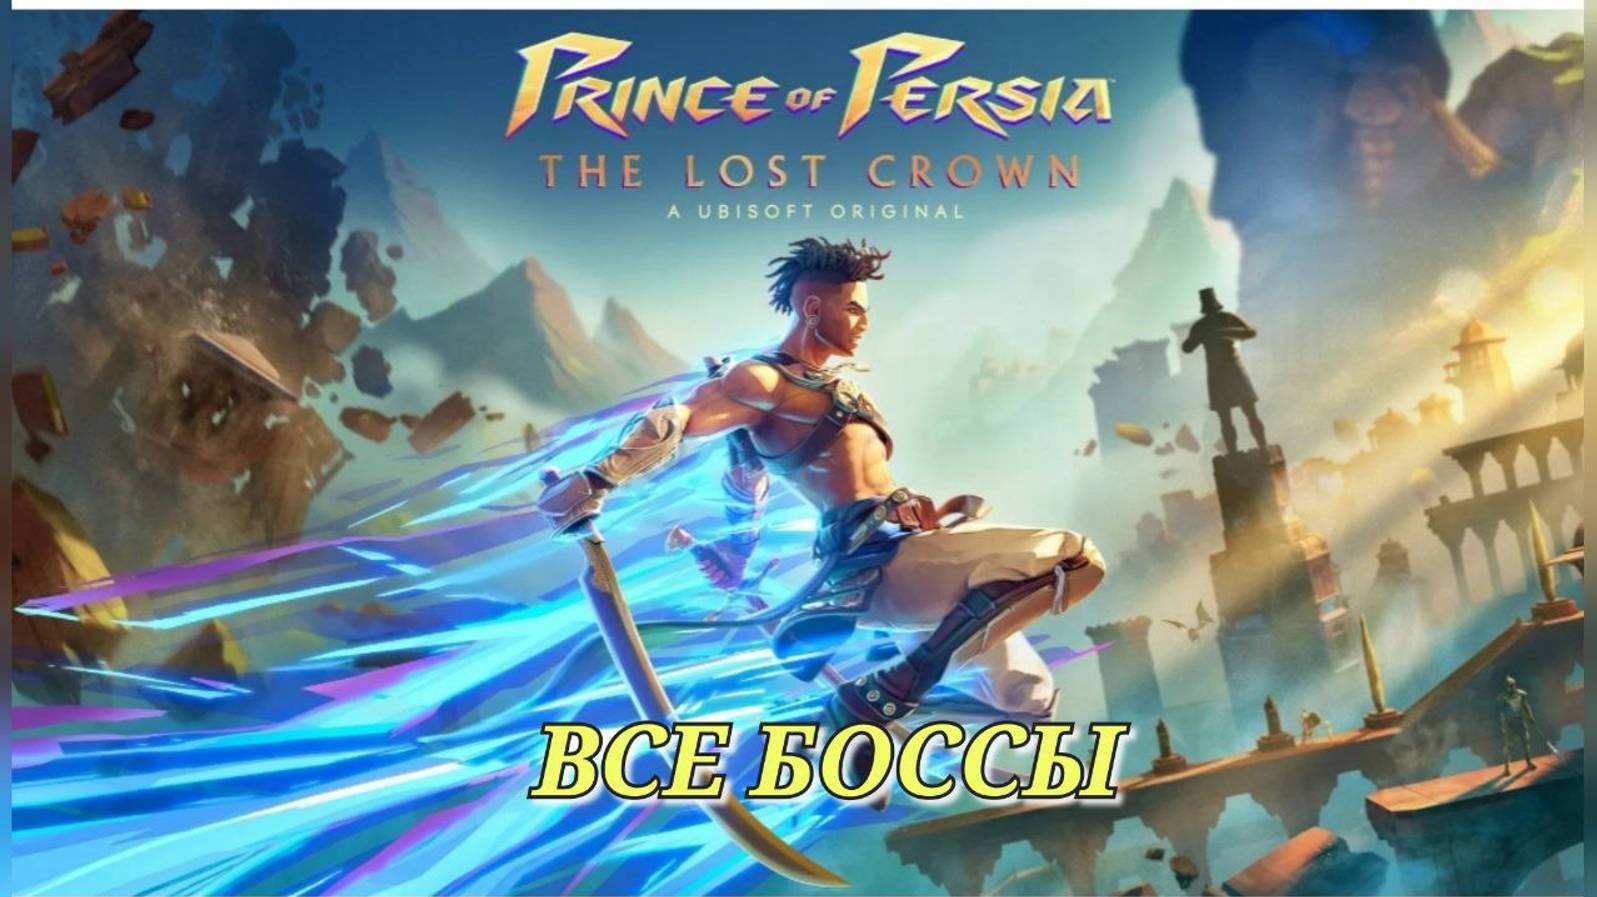 ВСЕ БОССЫ Prince of Persia - The Lost Crown